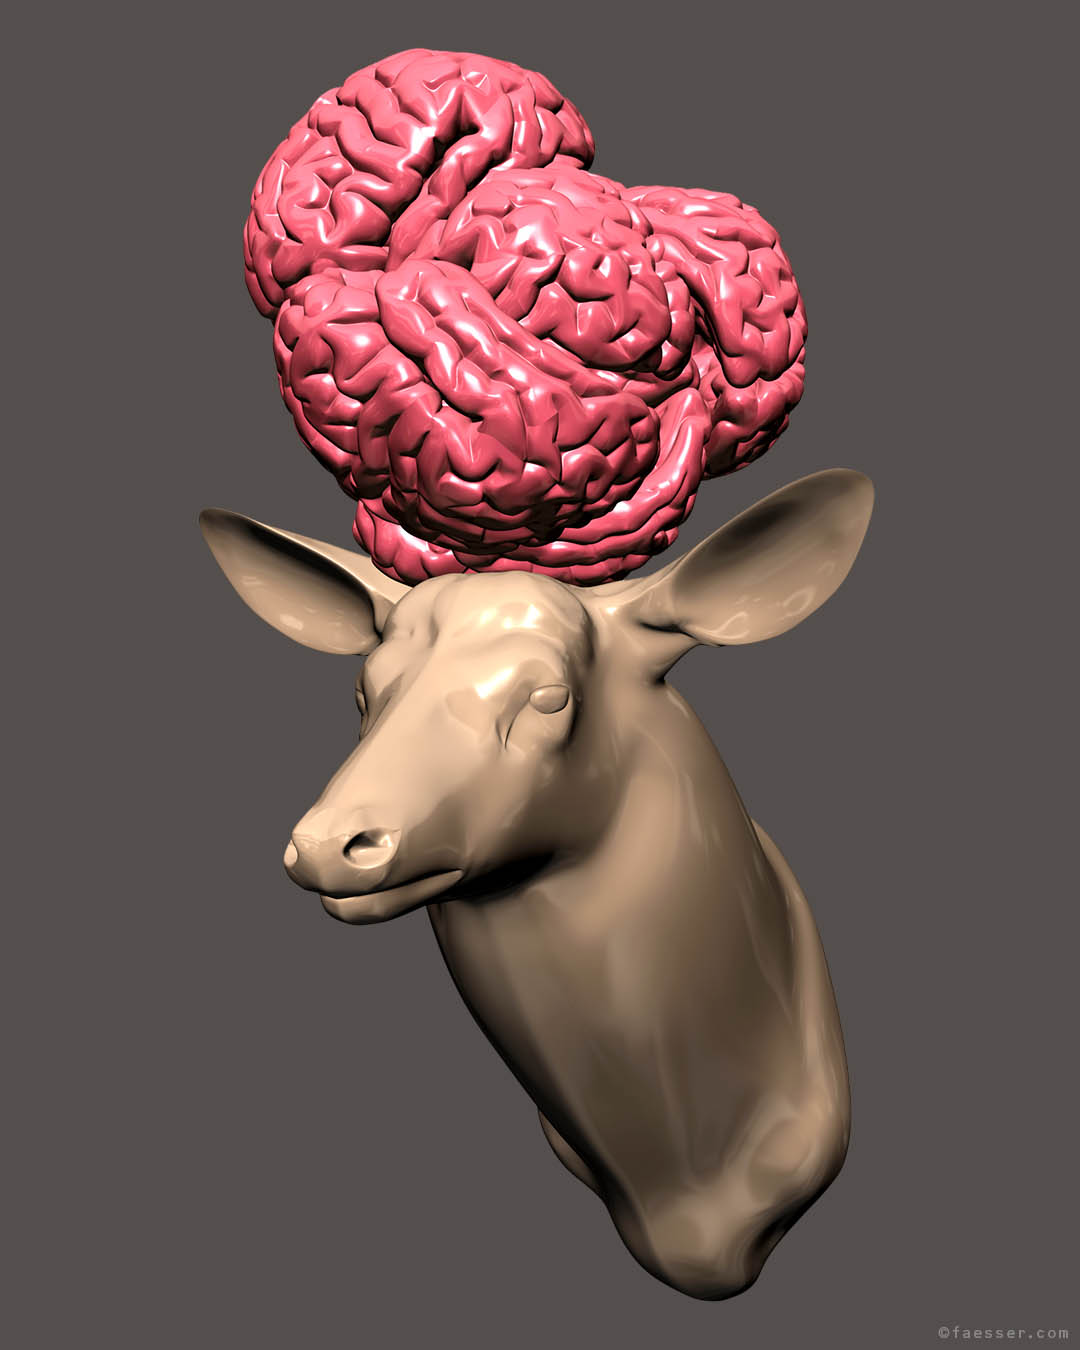 Brainer: deer trophy with celebrated brain sculpture as antlers; work of art as figurative sculpture; artist Roland Faesser, sculptor and painter 2017